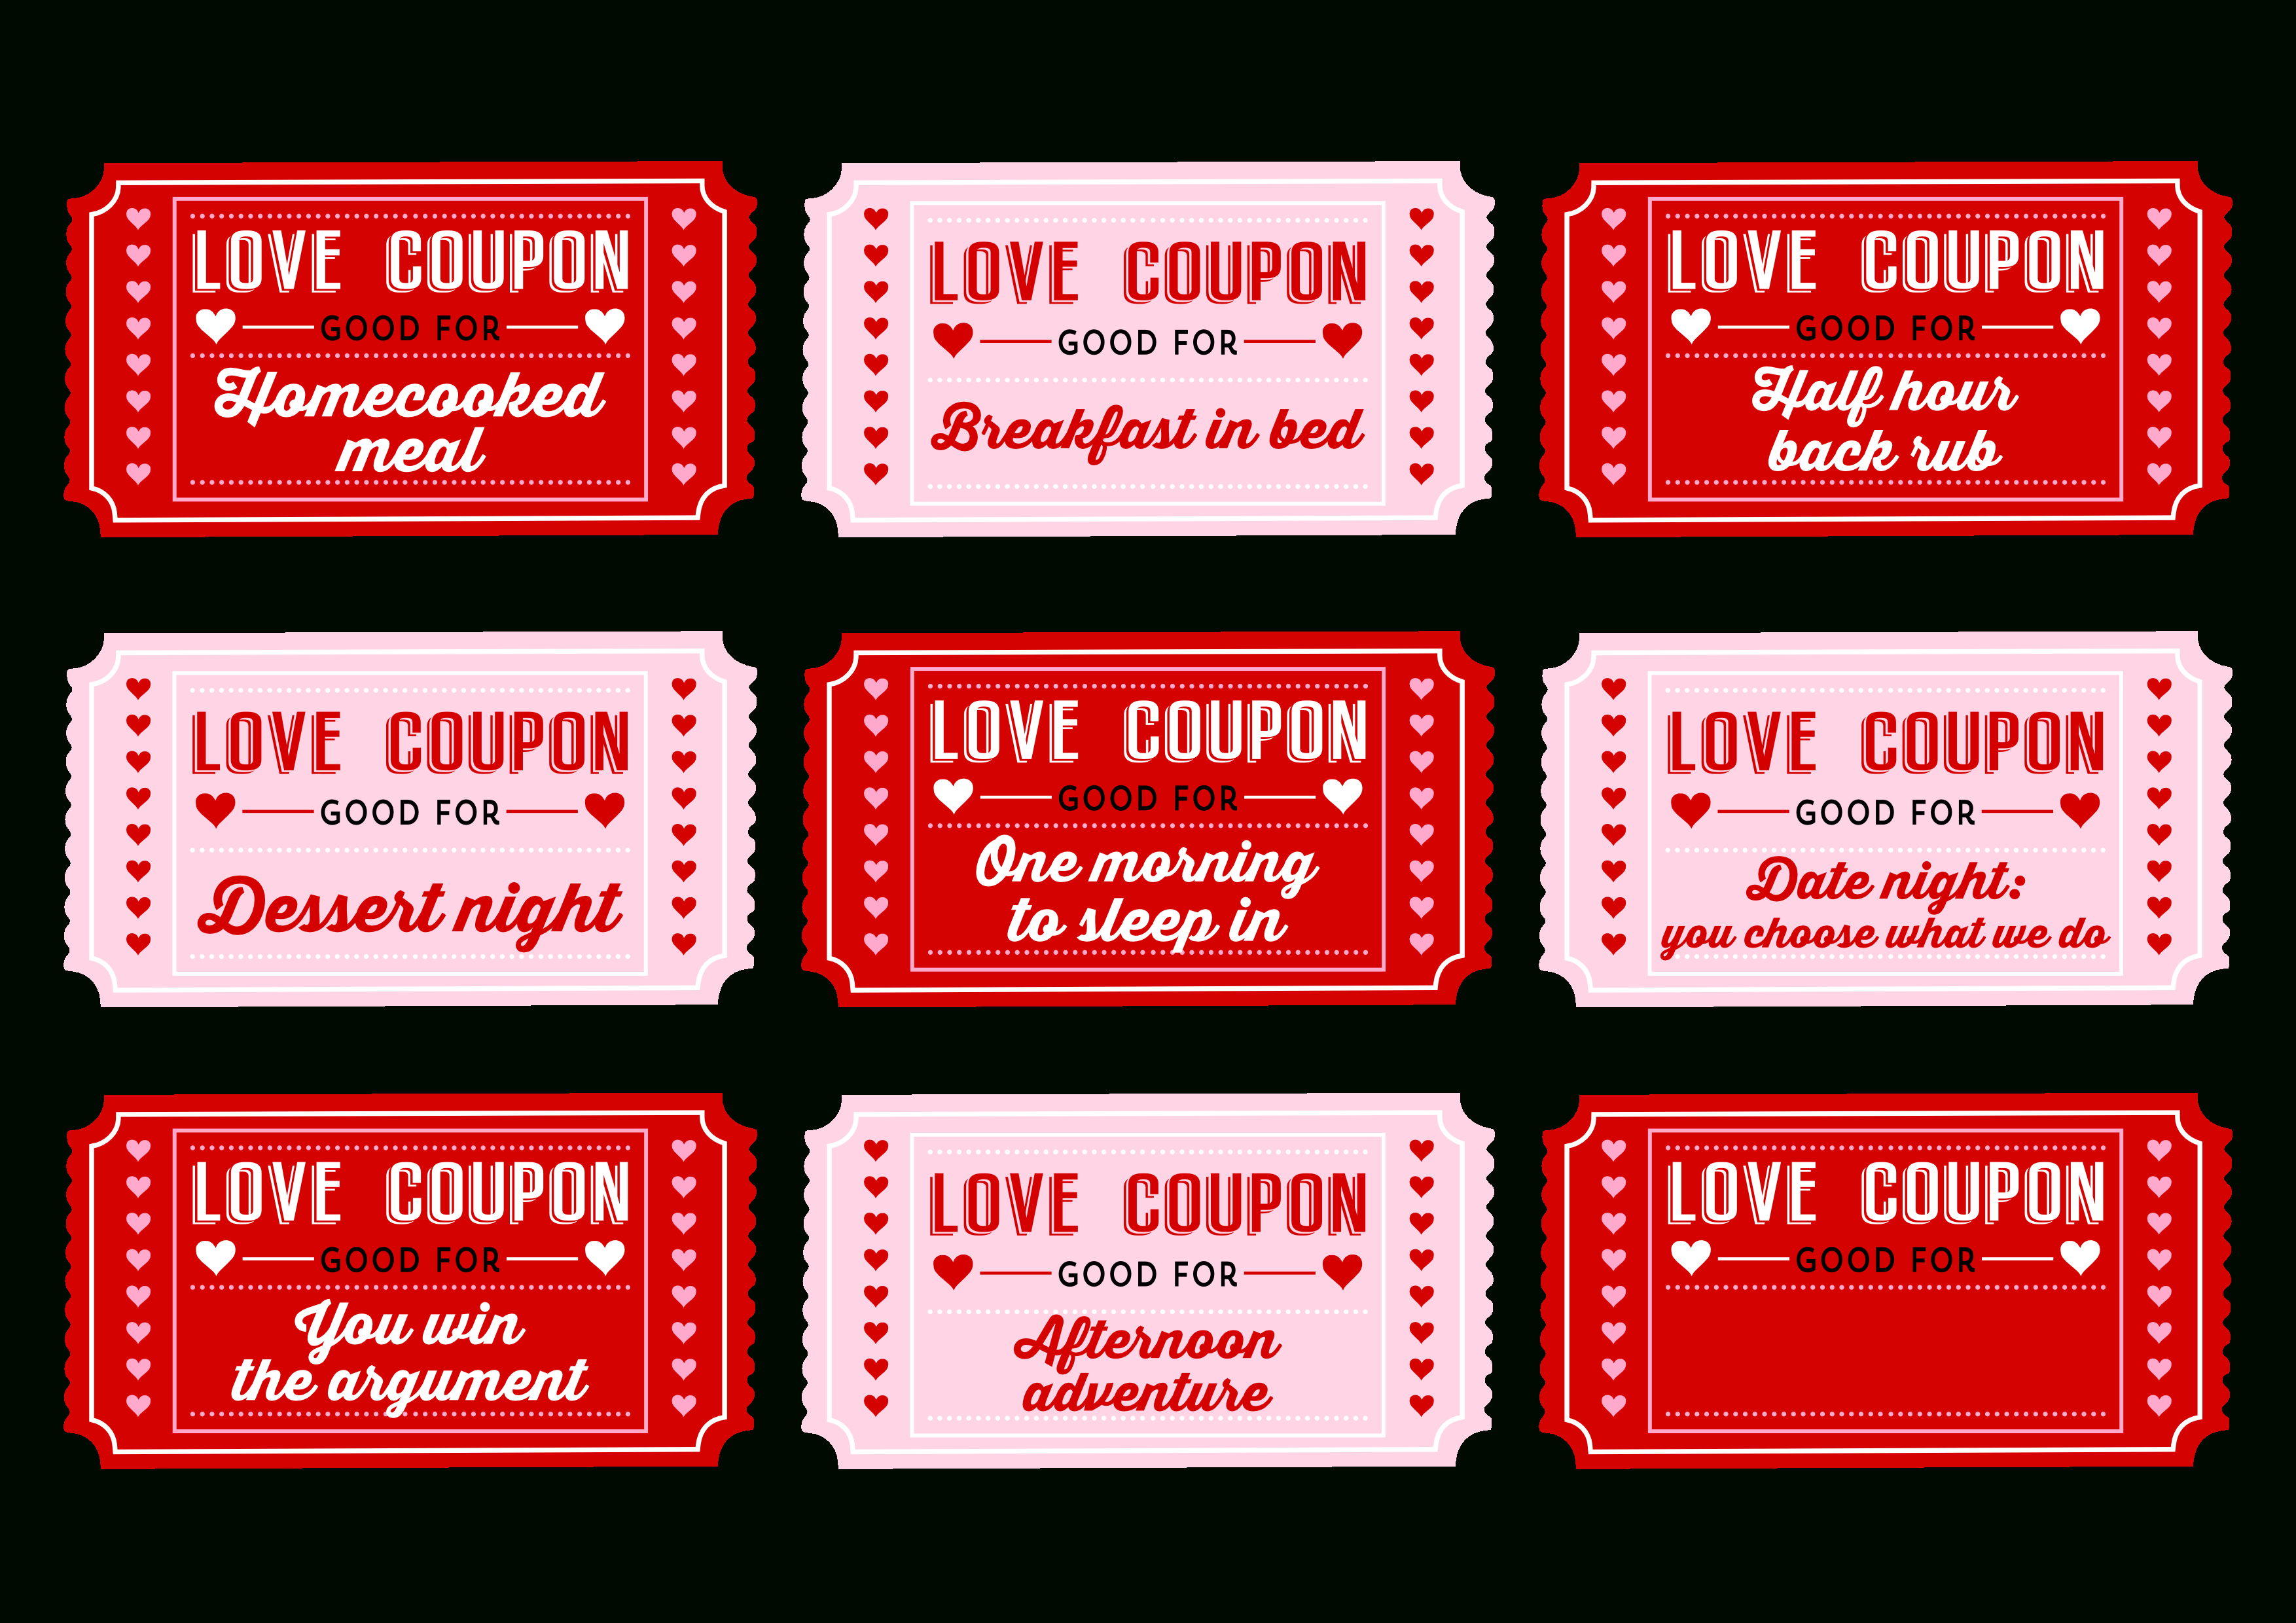 Free Printable Love Coupons For Couples On Valentine's Day! | Catch - Free Printable Love Coupons For Wife